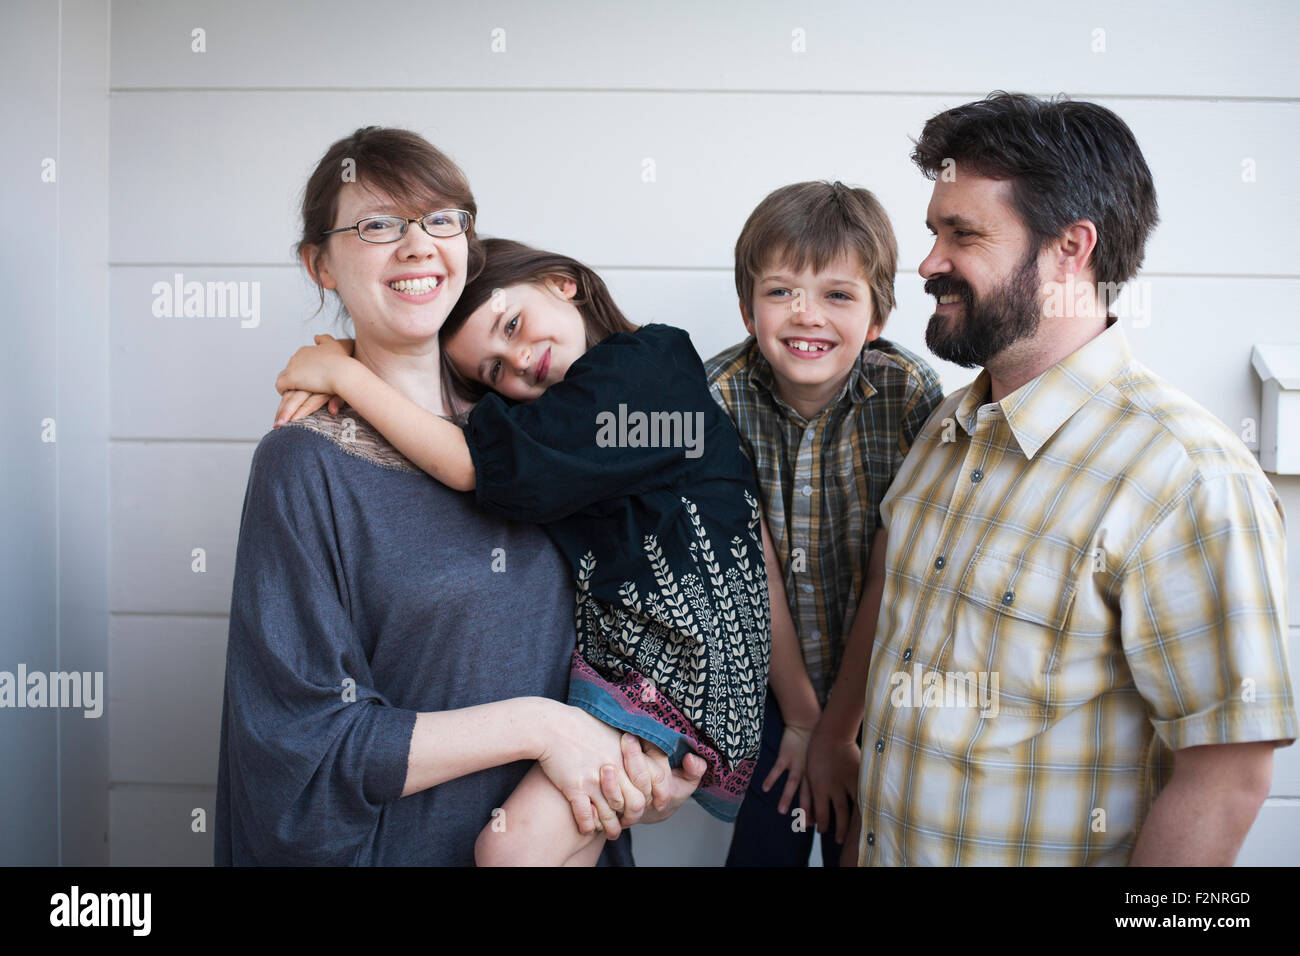 Caucasian parents and children smiling outdoors Stock Photo